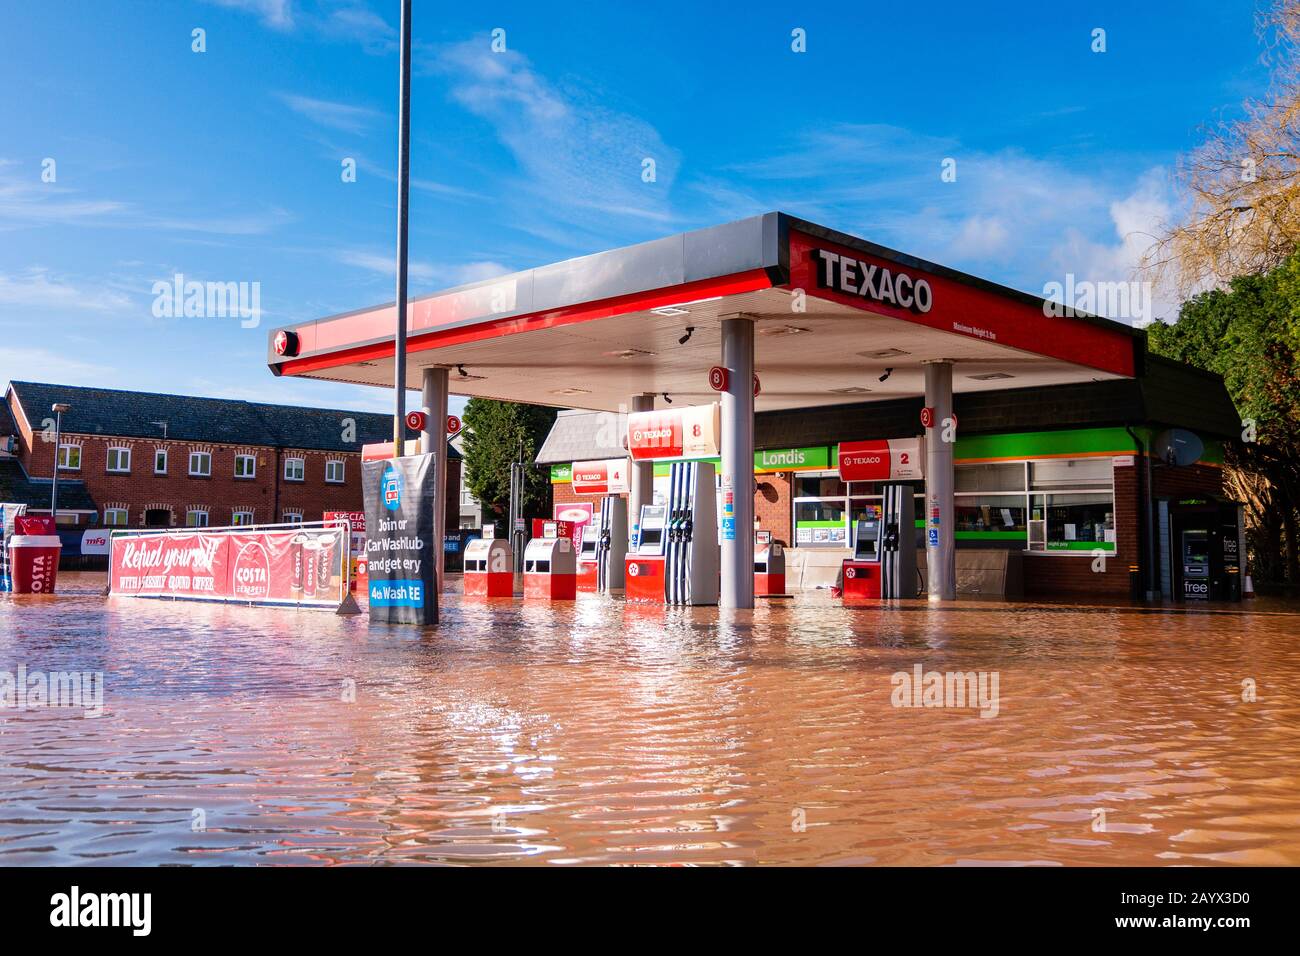 Storm Dennis flooding in Hereford, February 2020. Petrol station forecourt underwater completely flooded due to extreme weather, UK. Stock Photo